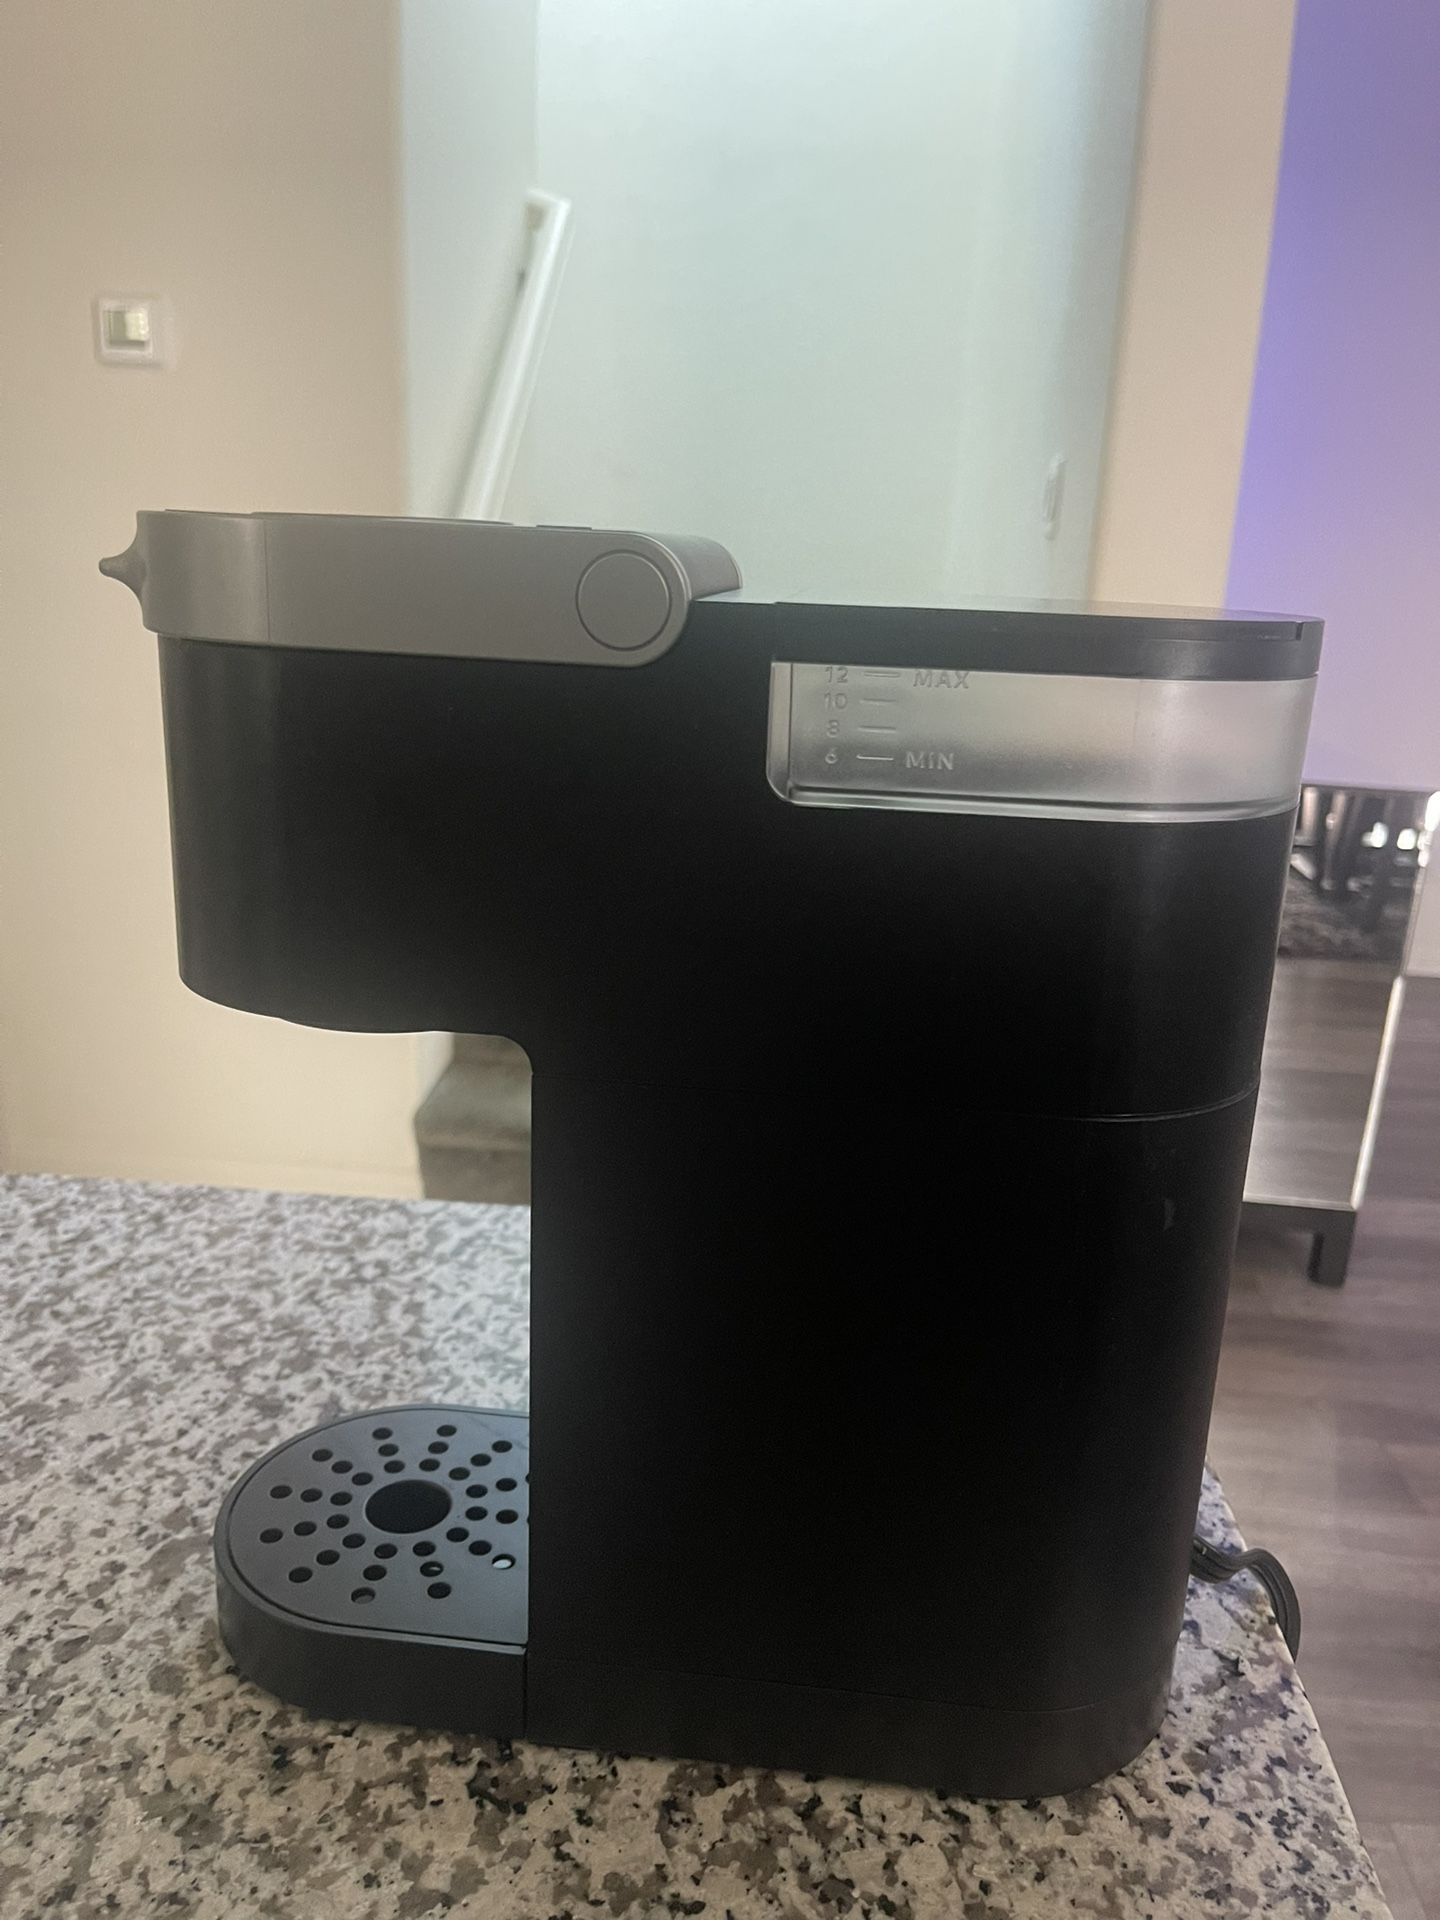 Mainstays 12 cup coffee maker for Sale in Rialto, CA - OfferUp